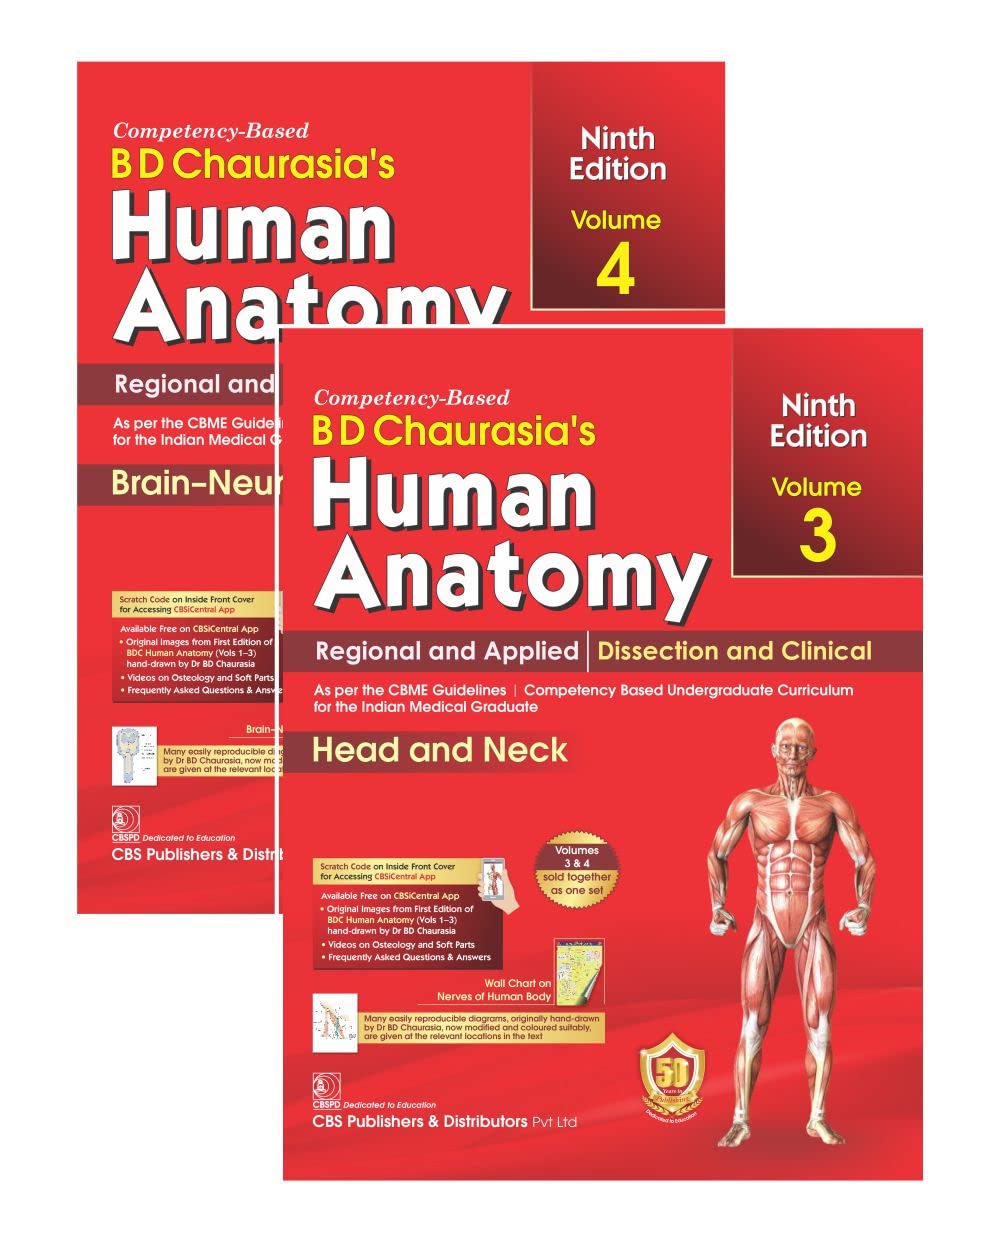 BD CHAURASIAS HUMAN ANATOMY 9ED VOL 3 AND 4 REGIONAL AND APPLIED DISSECTION AND CLINICAL (BDC)